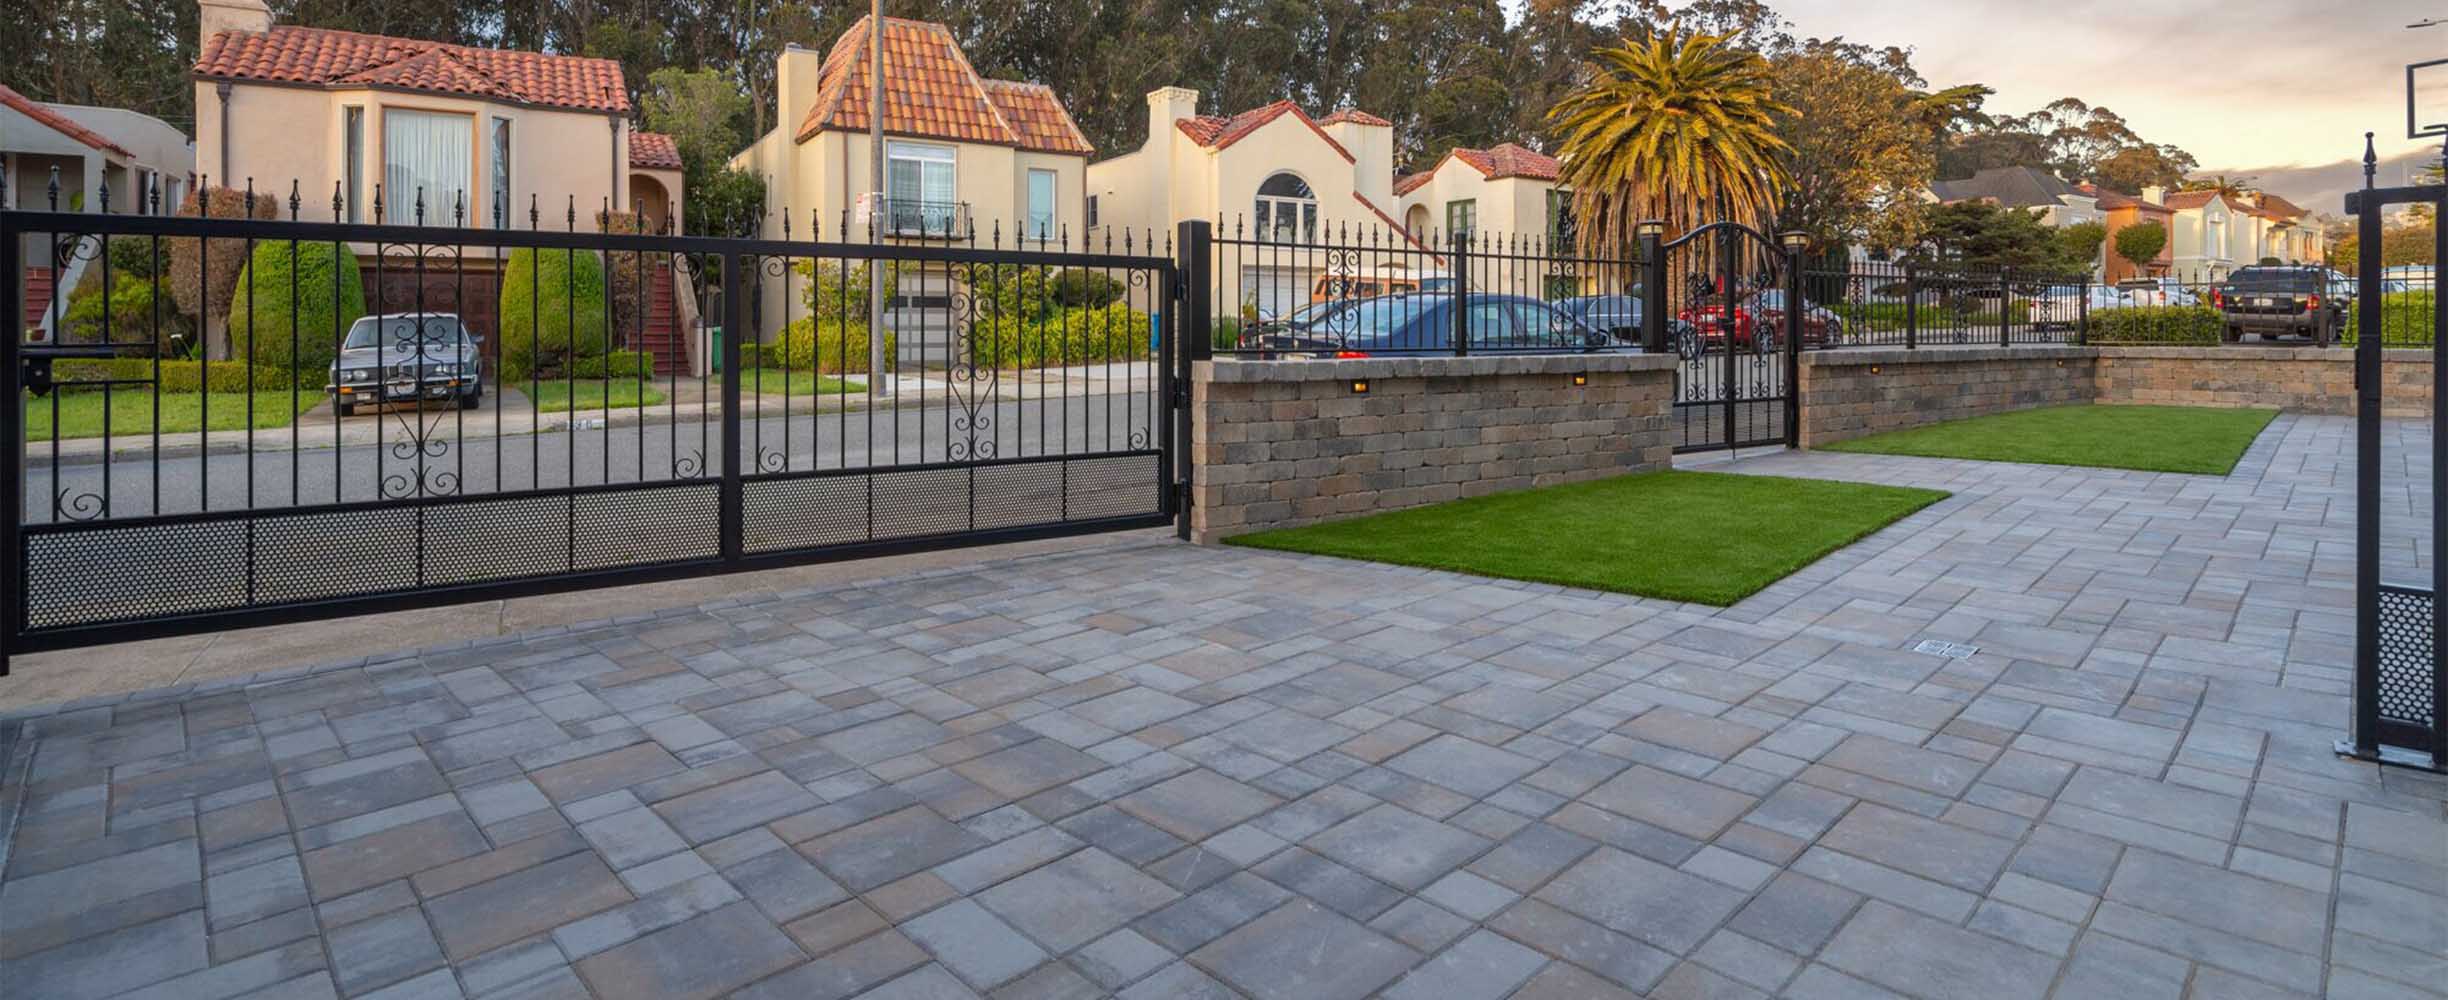 Landscaping with stone car entry and patio, fence and iron gates.